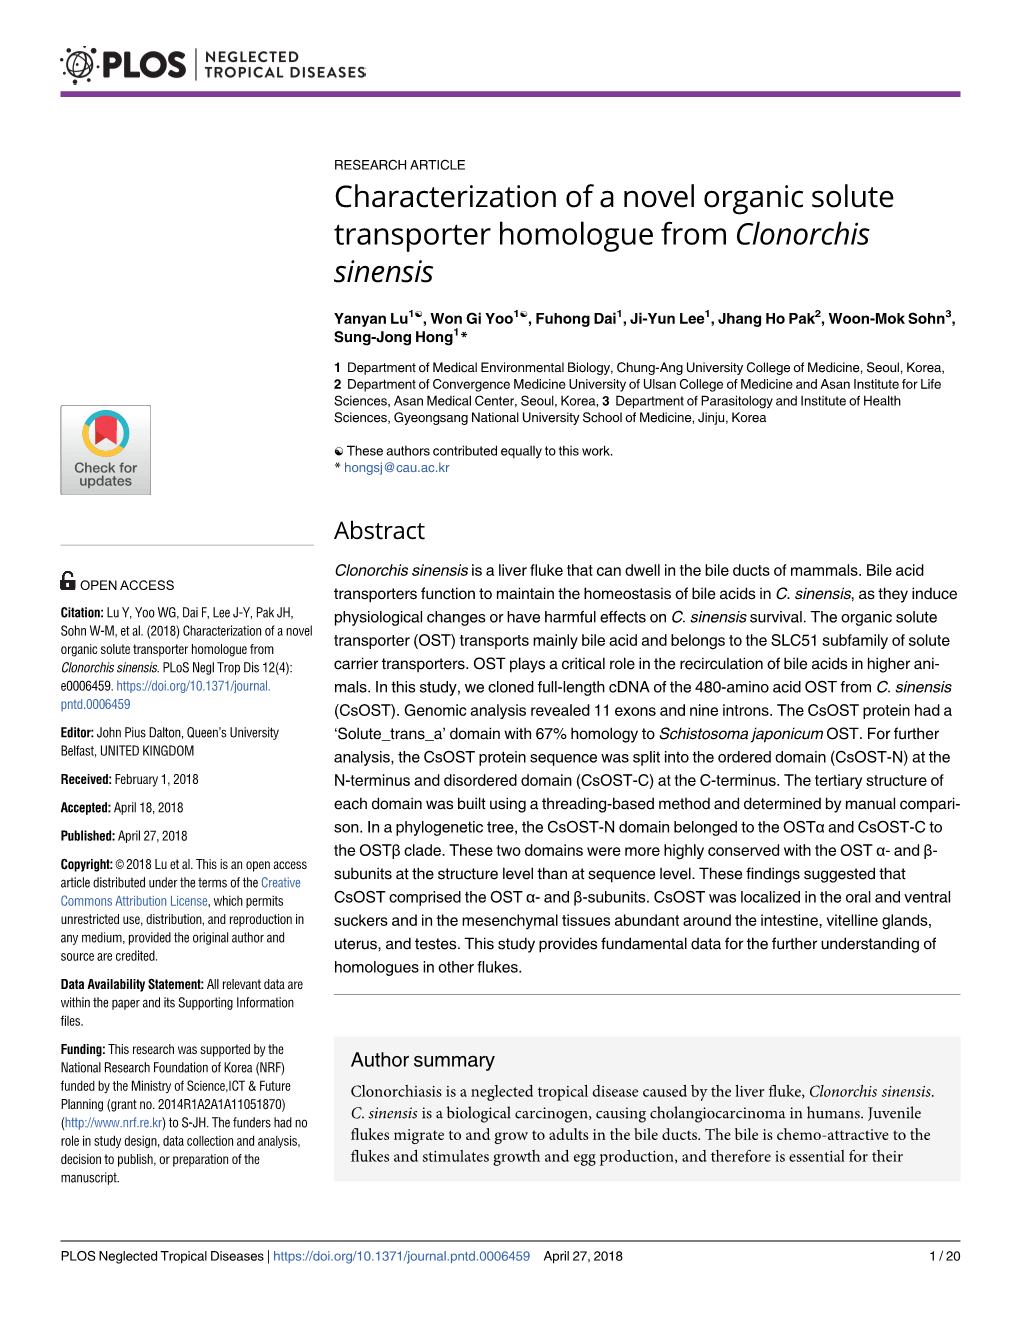 Characterization of a Novel Organic Solute Transporter Homologue from Clonorchis Sinensis